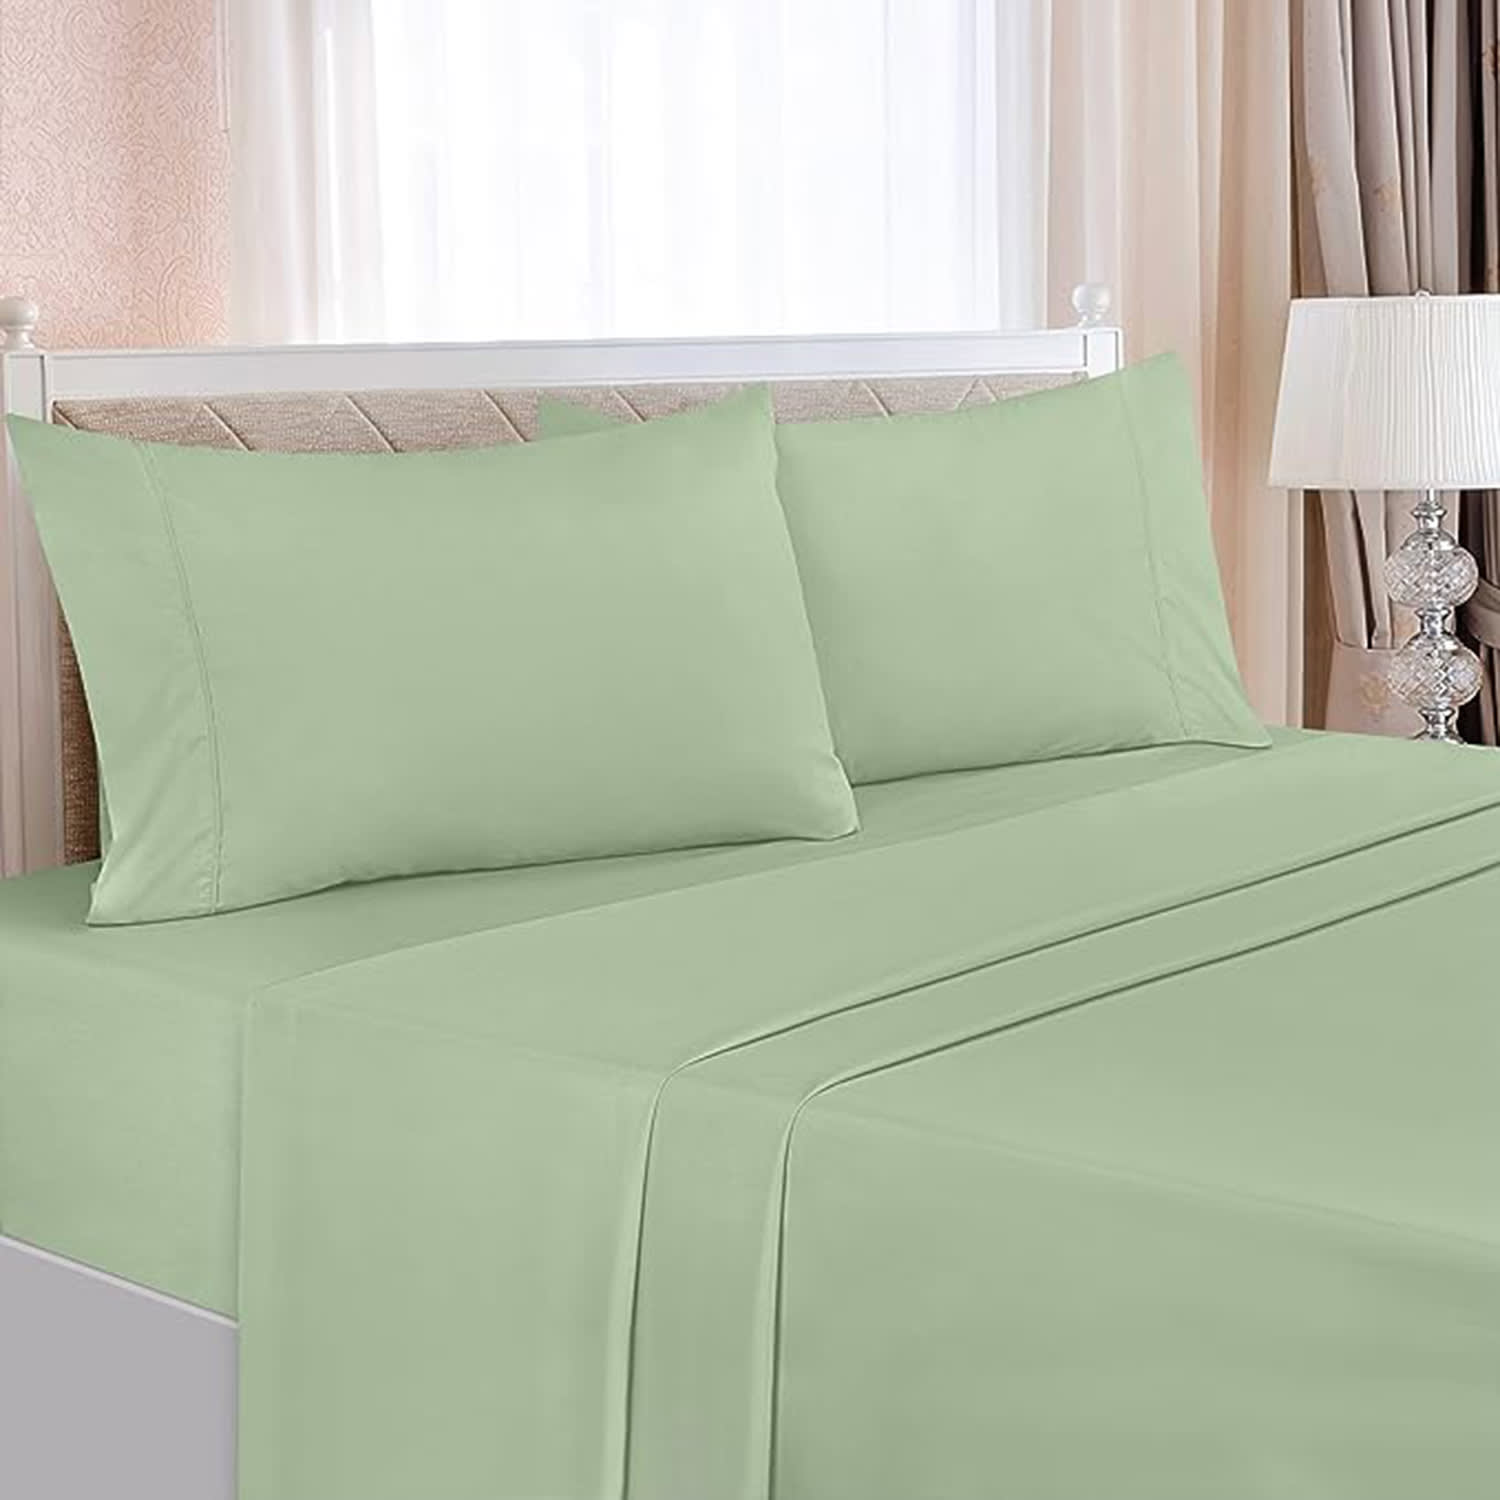 Utopia Bedding Bed Sheet Set - 3 Piece (Multiple Colors And Sizes